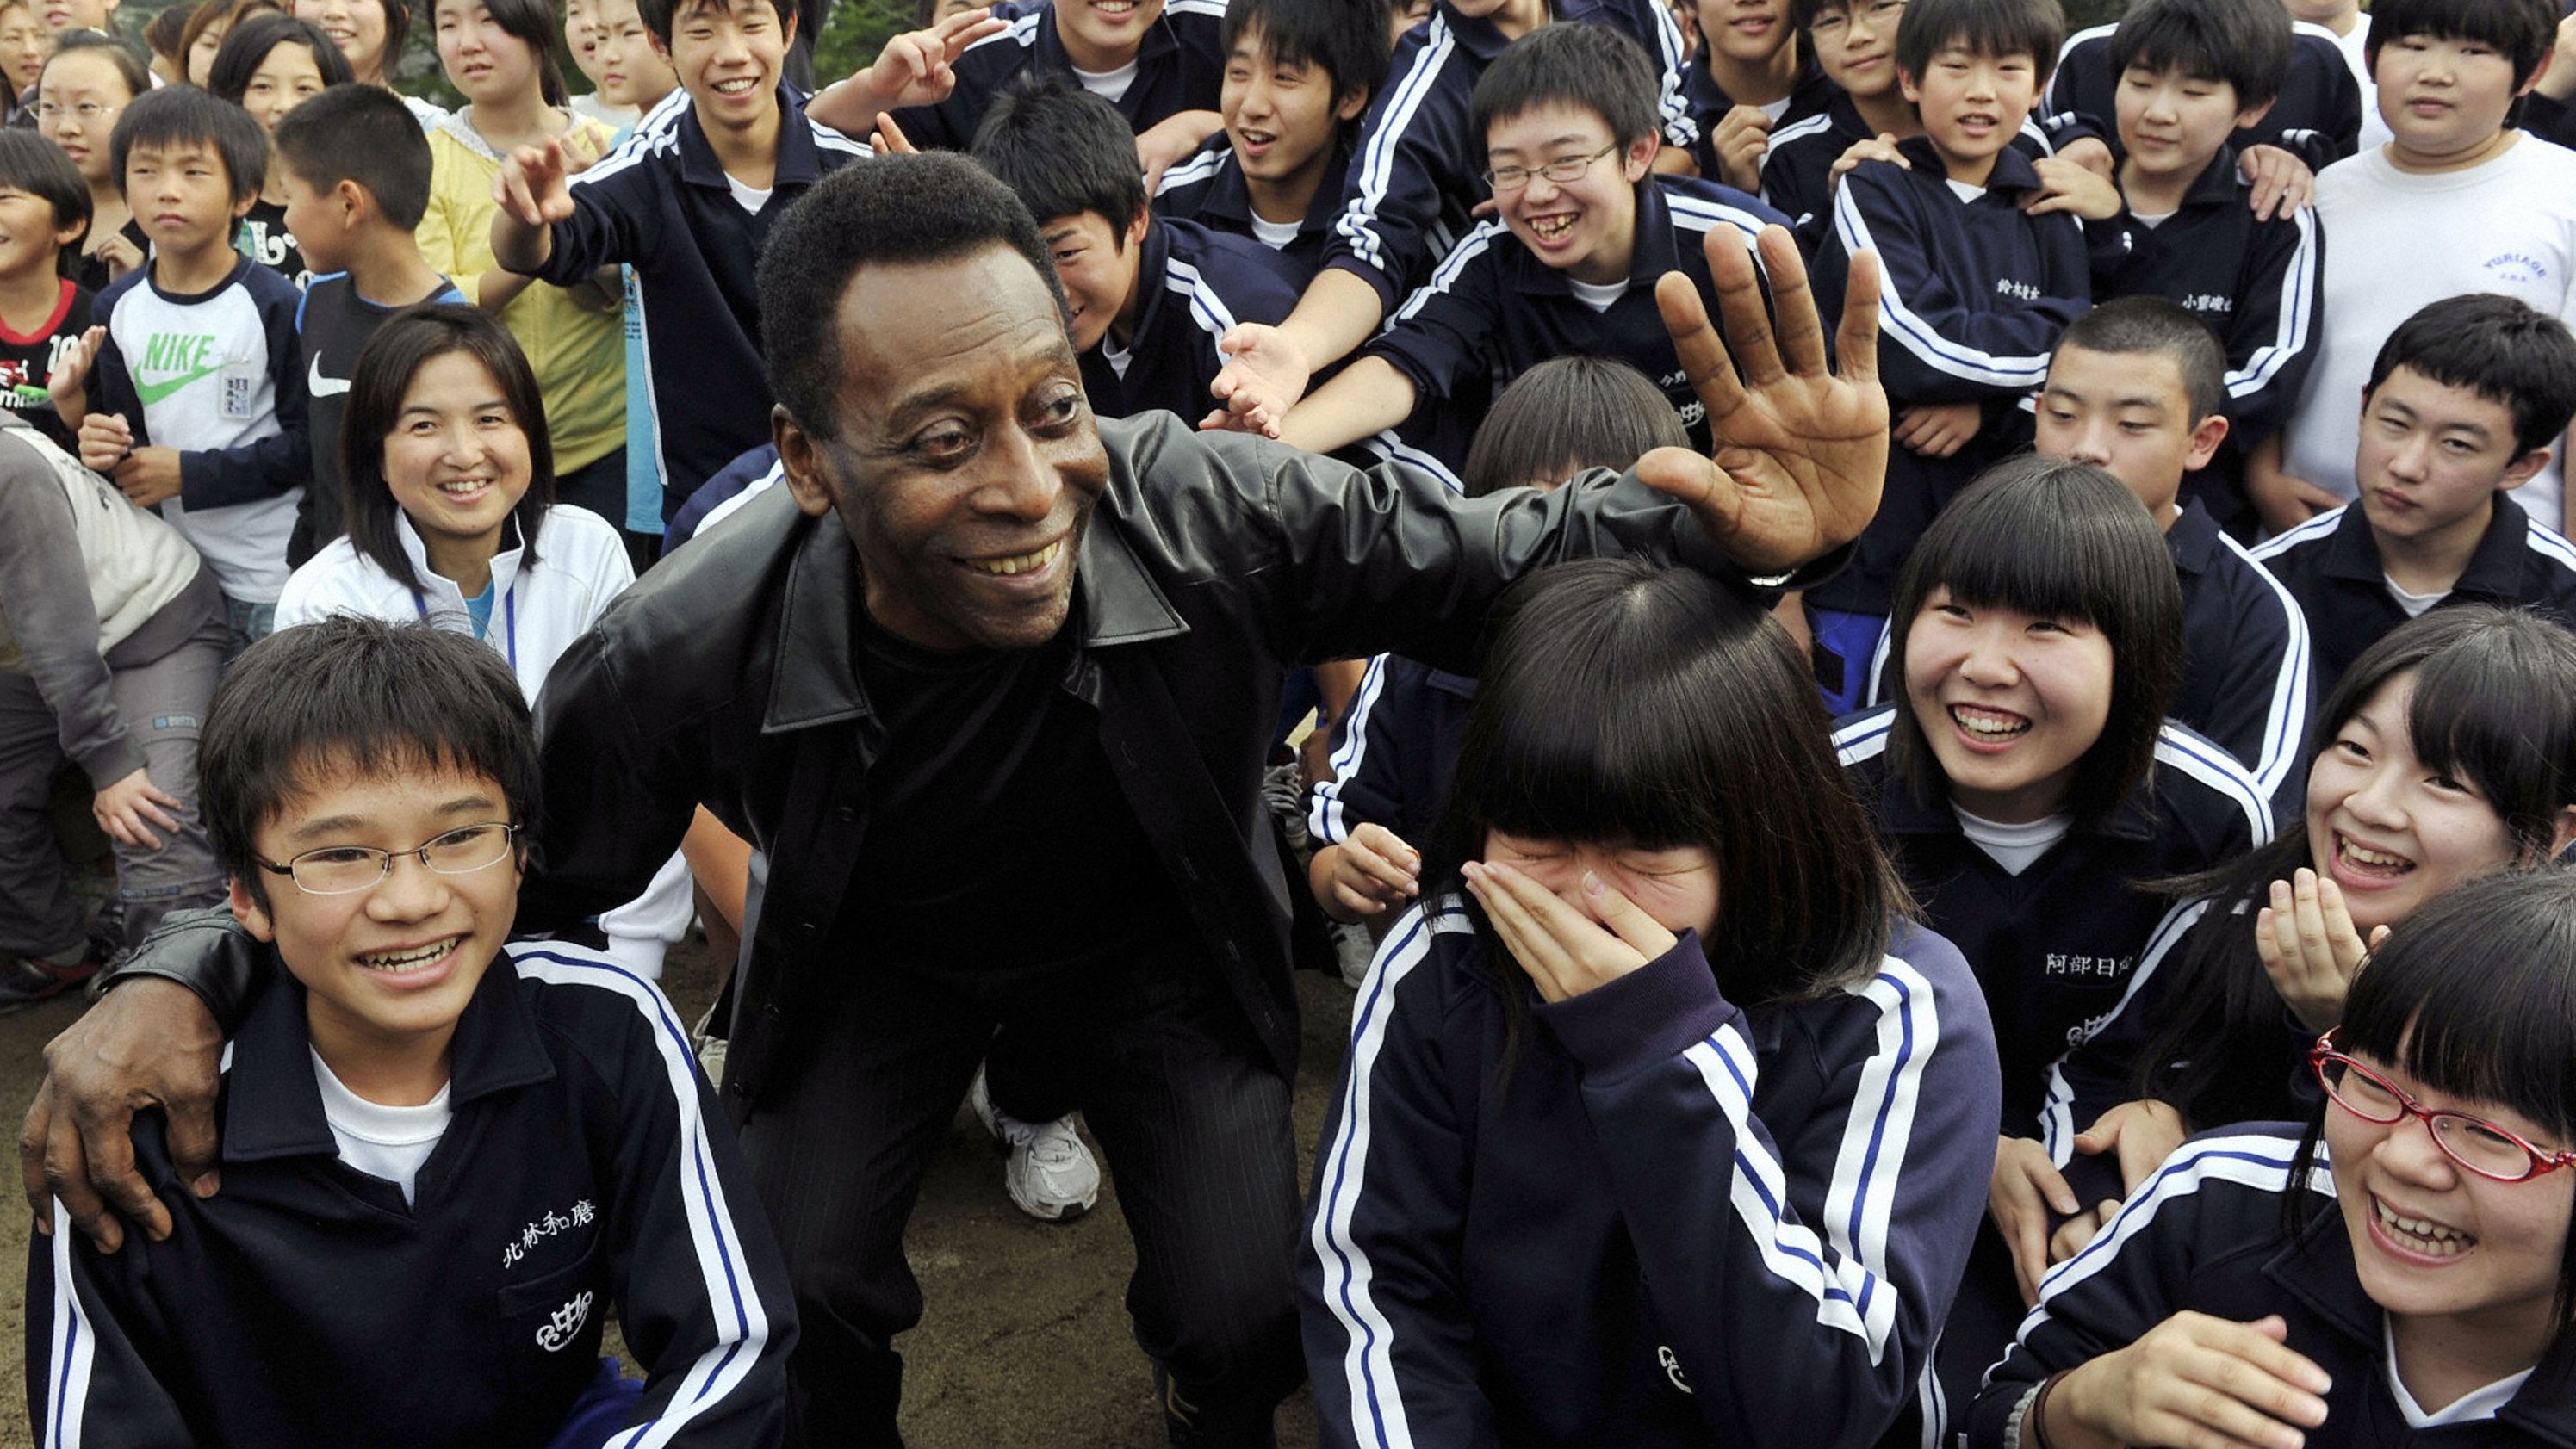 Pelé poses with children in Natori, Japan, in 2011, following an earthquake and tsunami in the region. He was there to help promote the 2014 World Cup, which took place in Brazil.